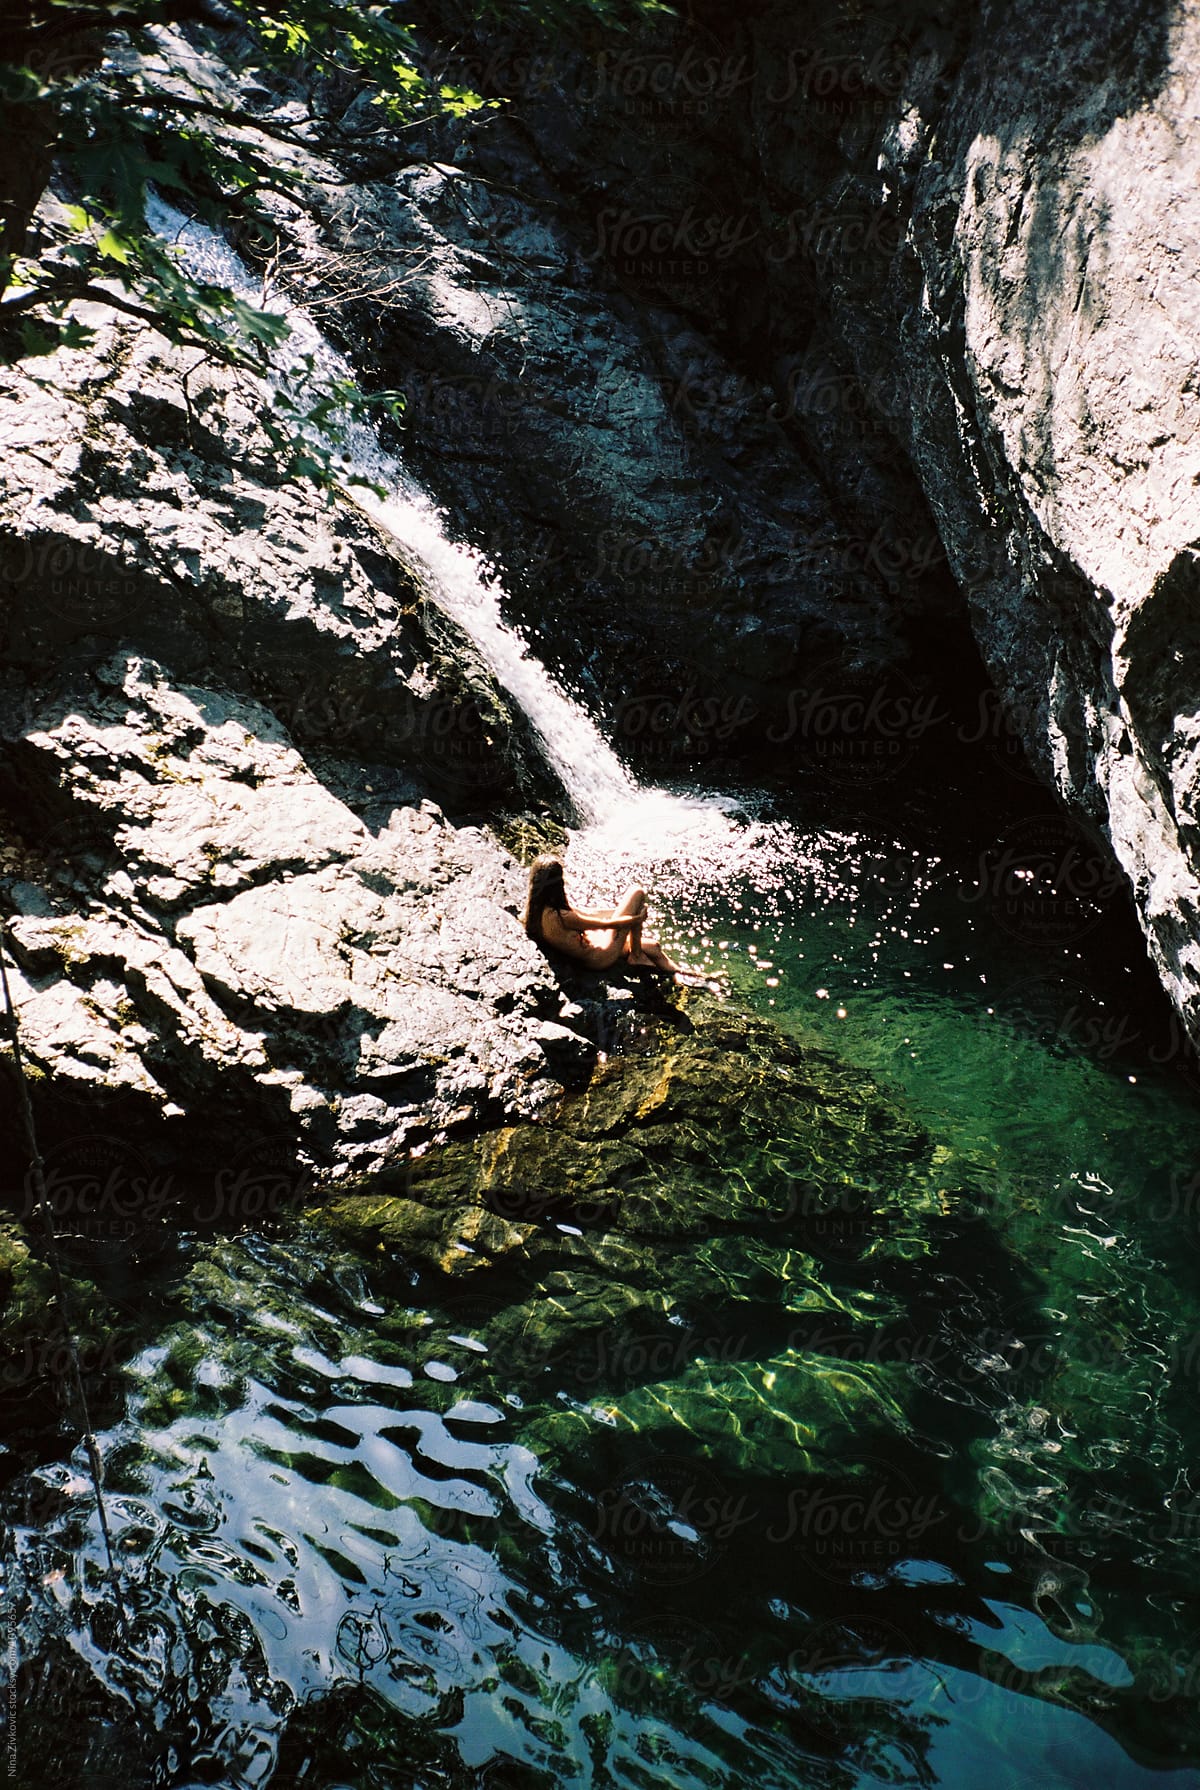 A young girl sitting by the waterfall.